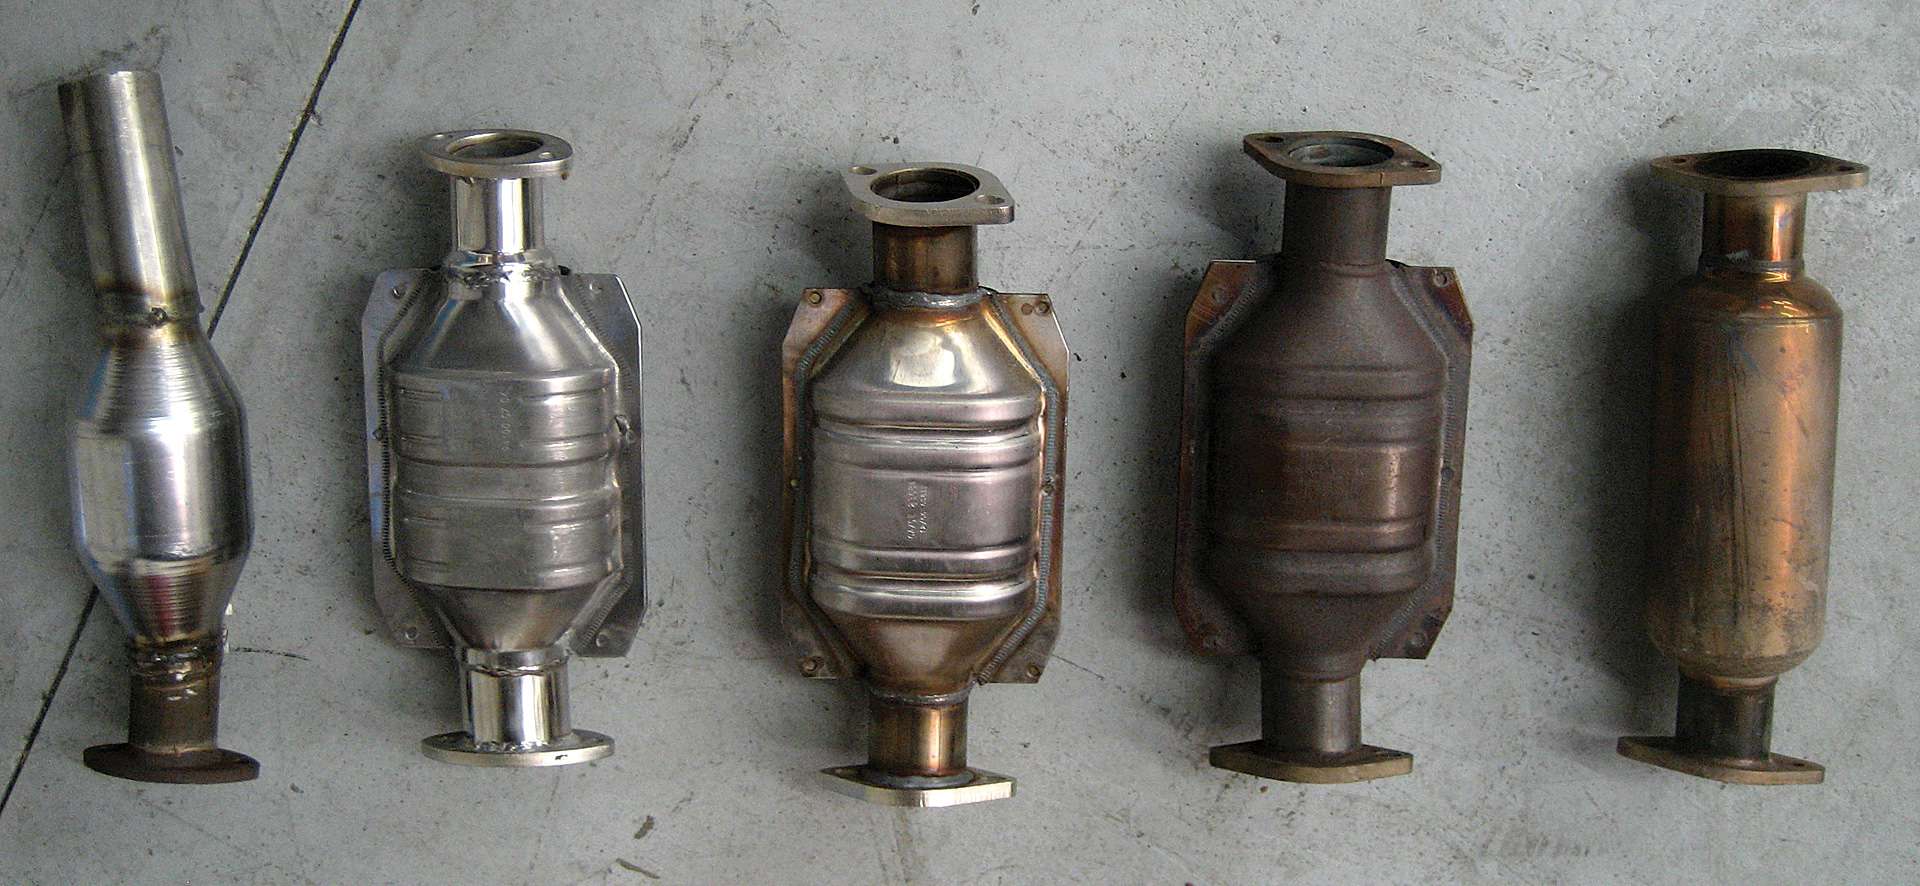 FAQs About Recycling Catalytic Converters